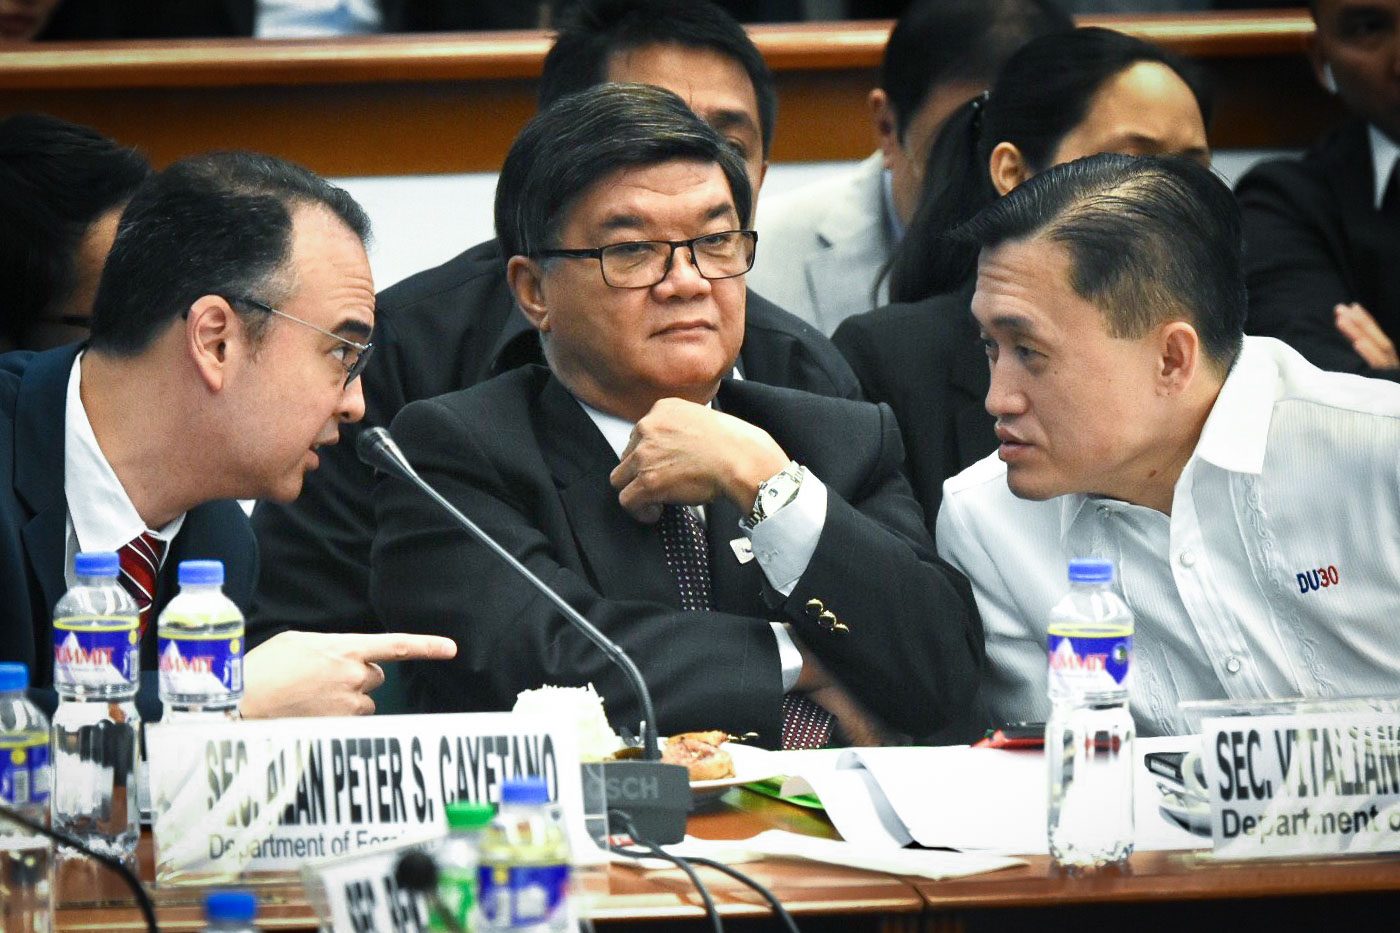 CONSULTATION. Cabinet officials including Secretaries Alan Cayetano and Vitaliano Aguirre attend the Senate hearing on the controversial navy frigates deal on February 19, 2018. Photo by Angie de Silva/Rappler 